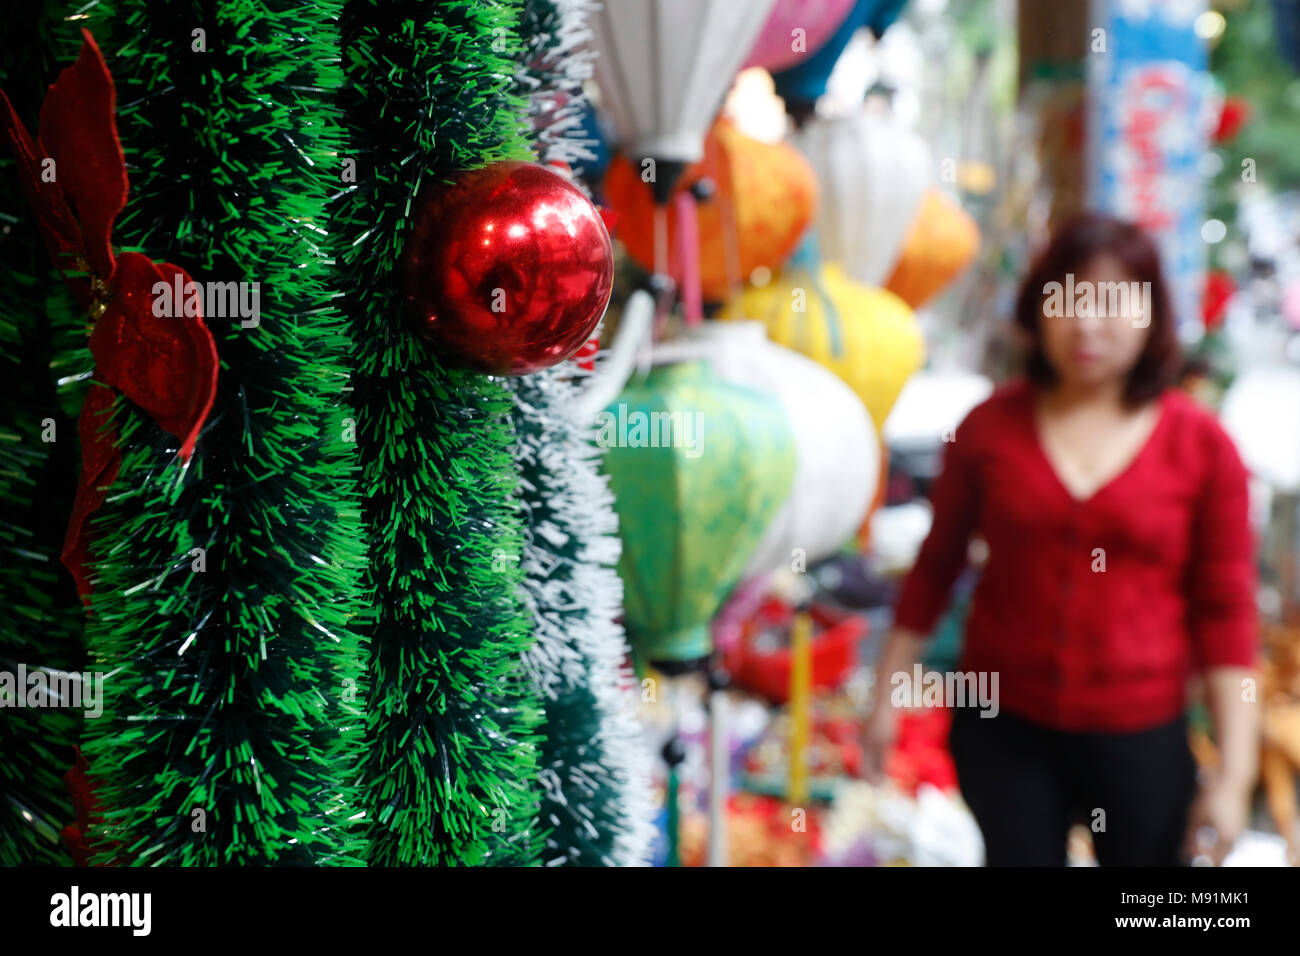 Vietnamese people shopping at market place to buy ornament for Christmas holiday.  Hanoi. Vietnam. Stock Photo